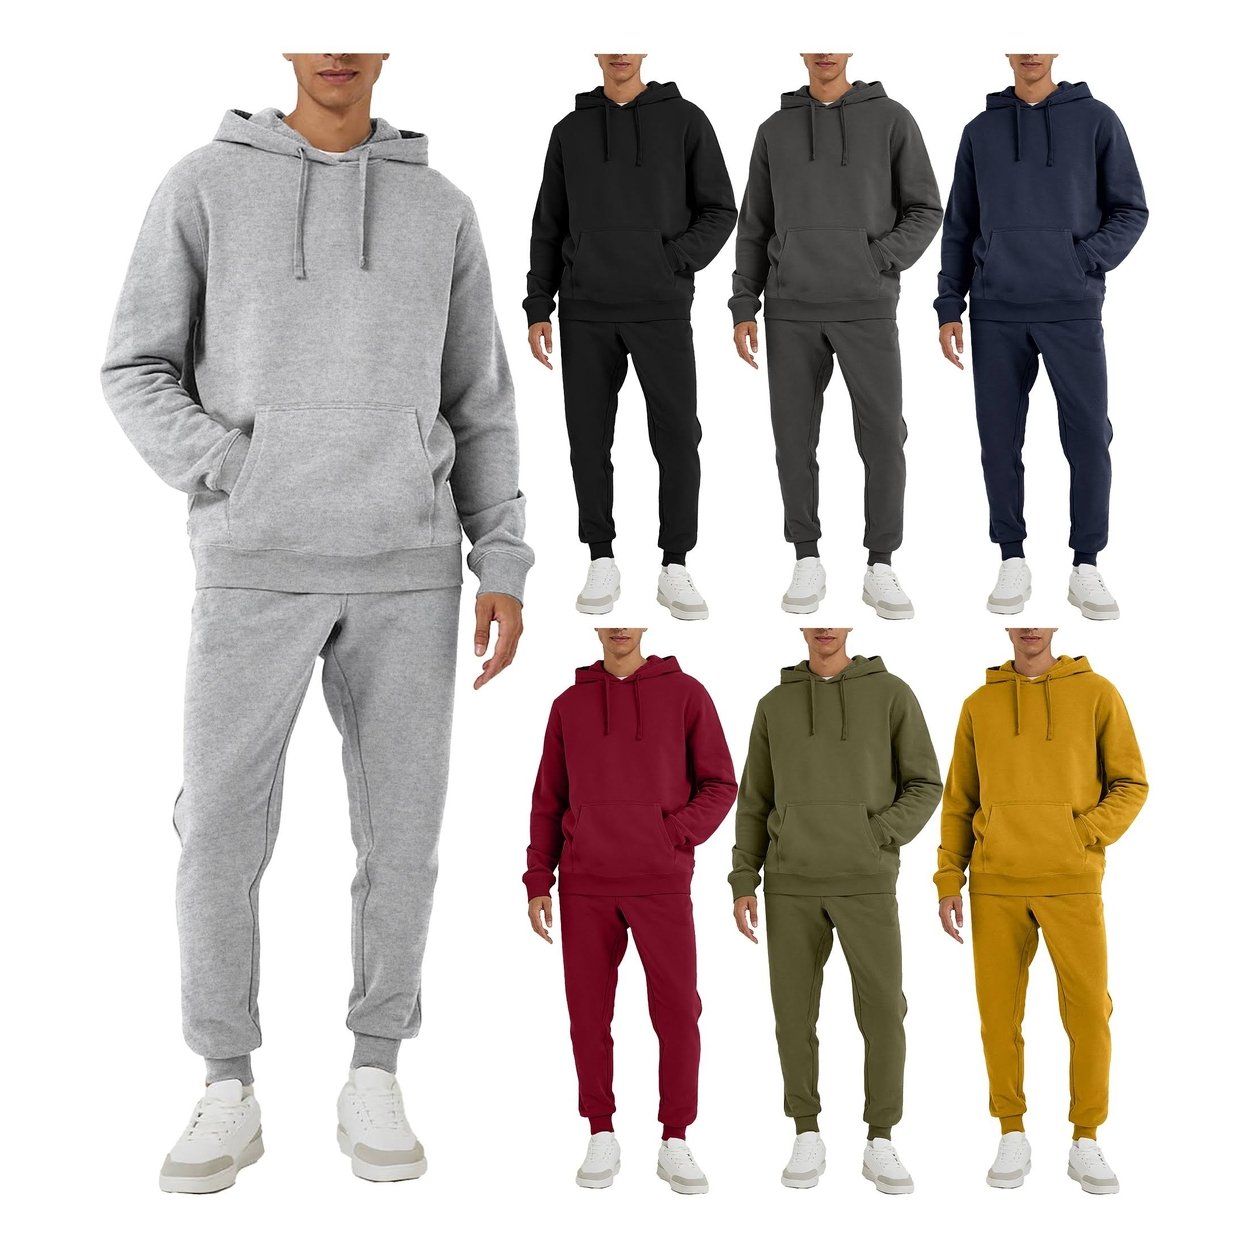 Men's Big & Tall Athletic Active Jogging Winter Warm Fleece Lined Pullover Tracksuit Set - Charcoal, Xx-large